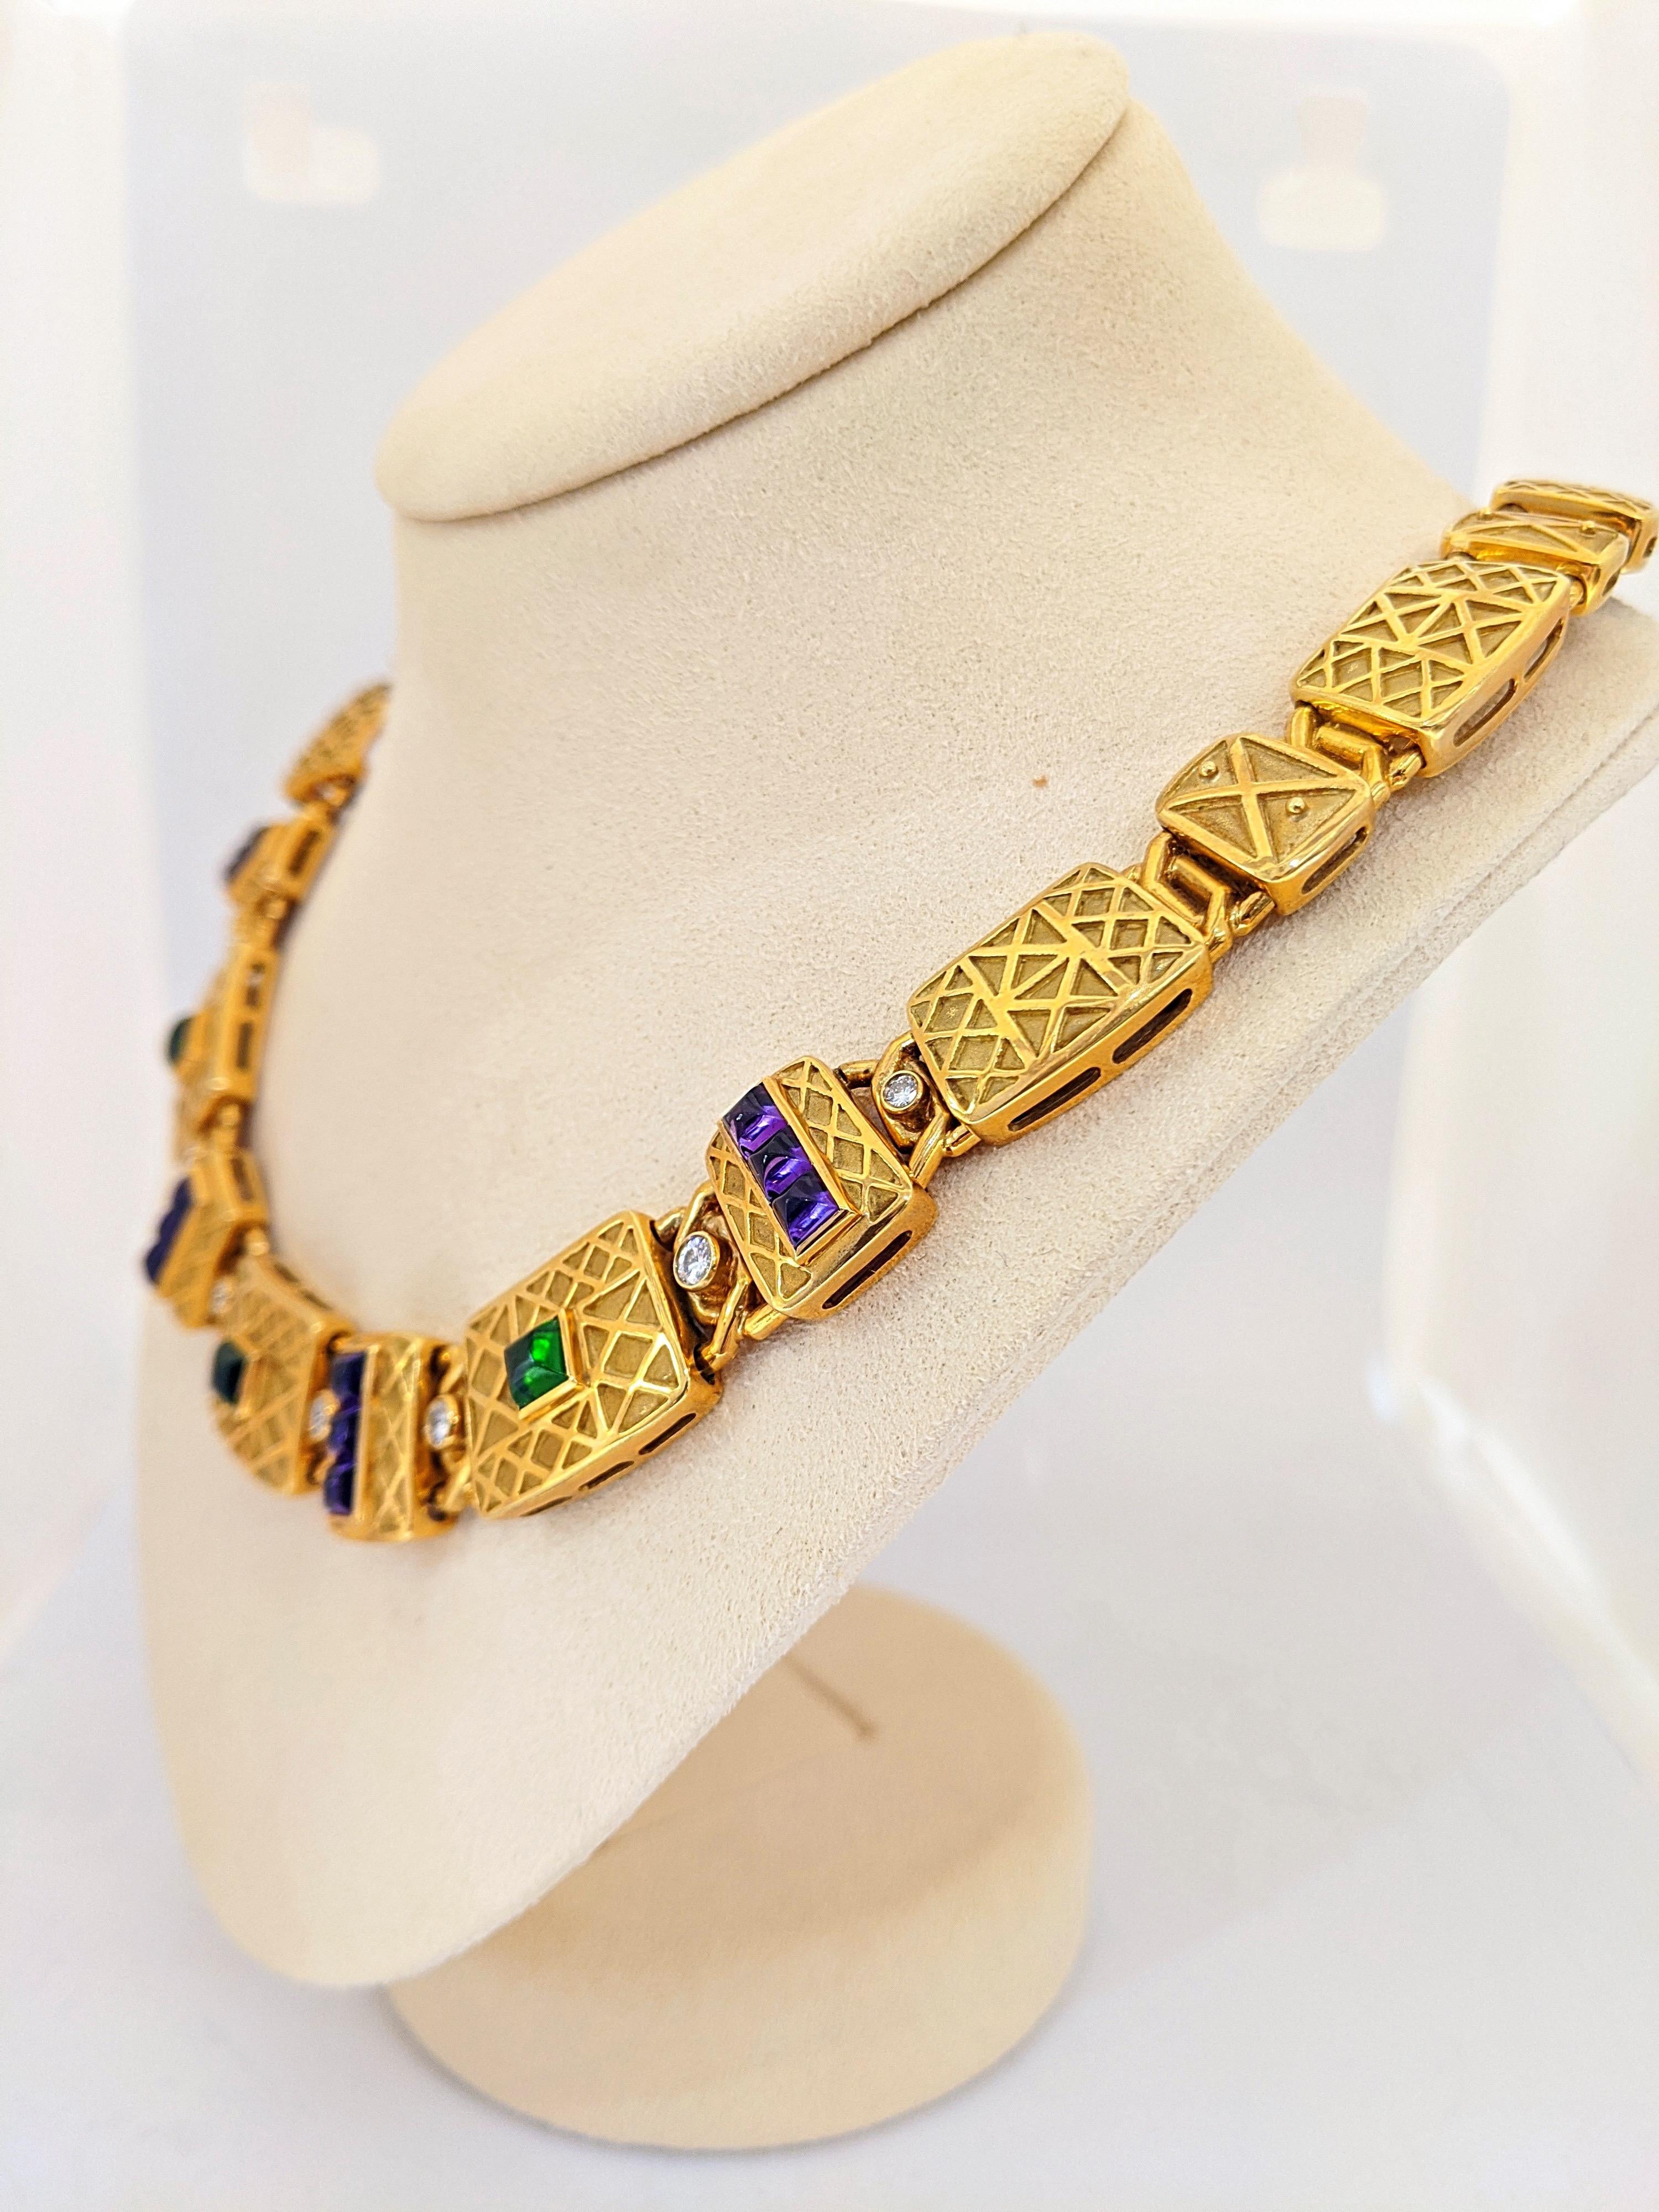 Designed by the Charles Turi Company for Cellini. This 18 karat gold necklace features 24 yellow gold links with a geometric pattern. They alternate between large and small.  The front 7 links are set with sugarloaf cabachon Amethyst and Green